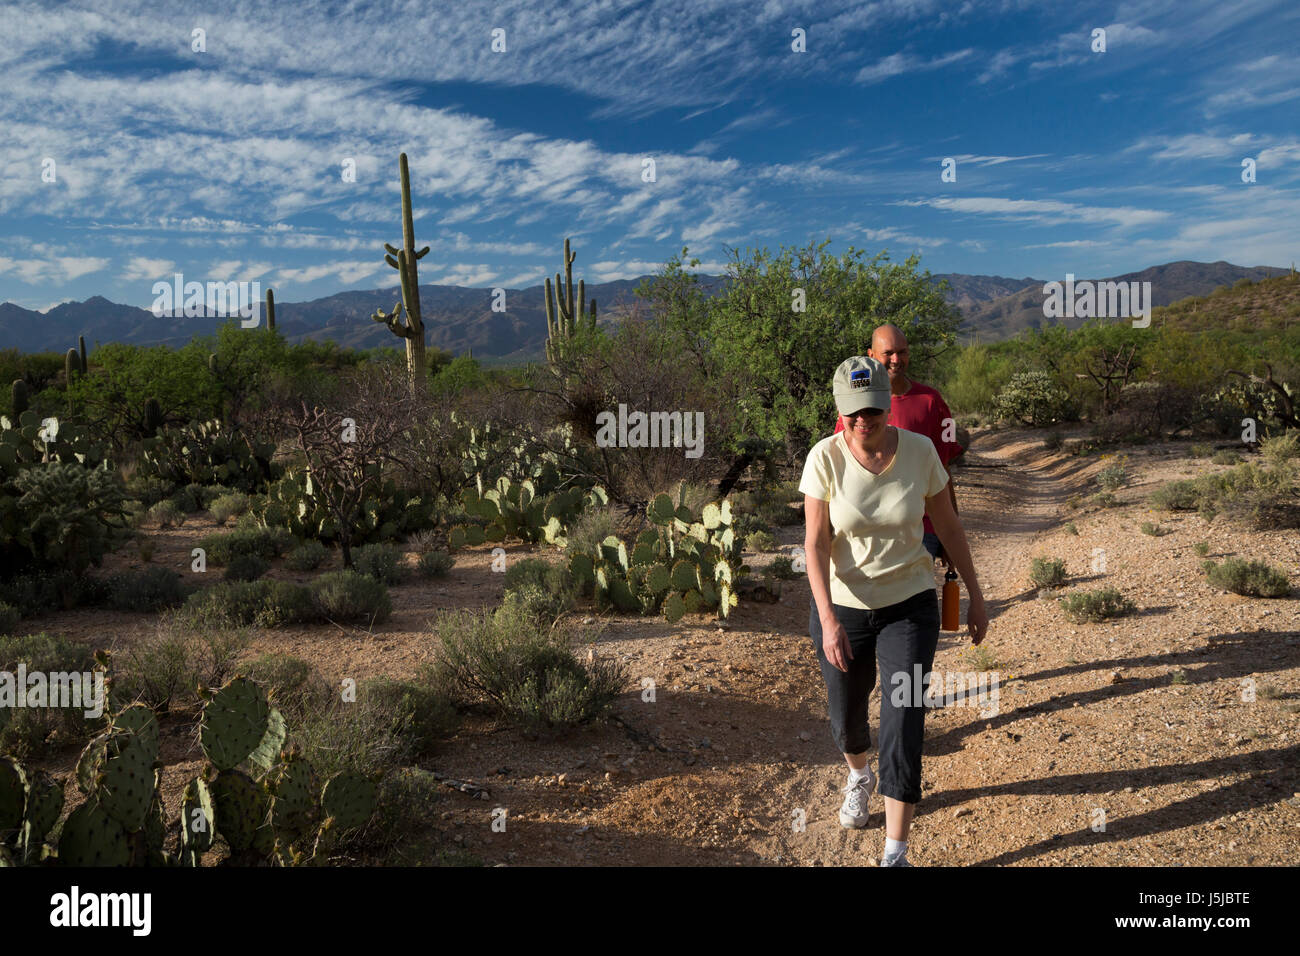 Tucson, Arizona - Hikers in the Cactus Forest in the Rincon Mountain District of Saguaro National Park. Stock Photo